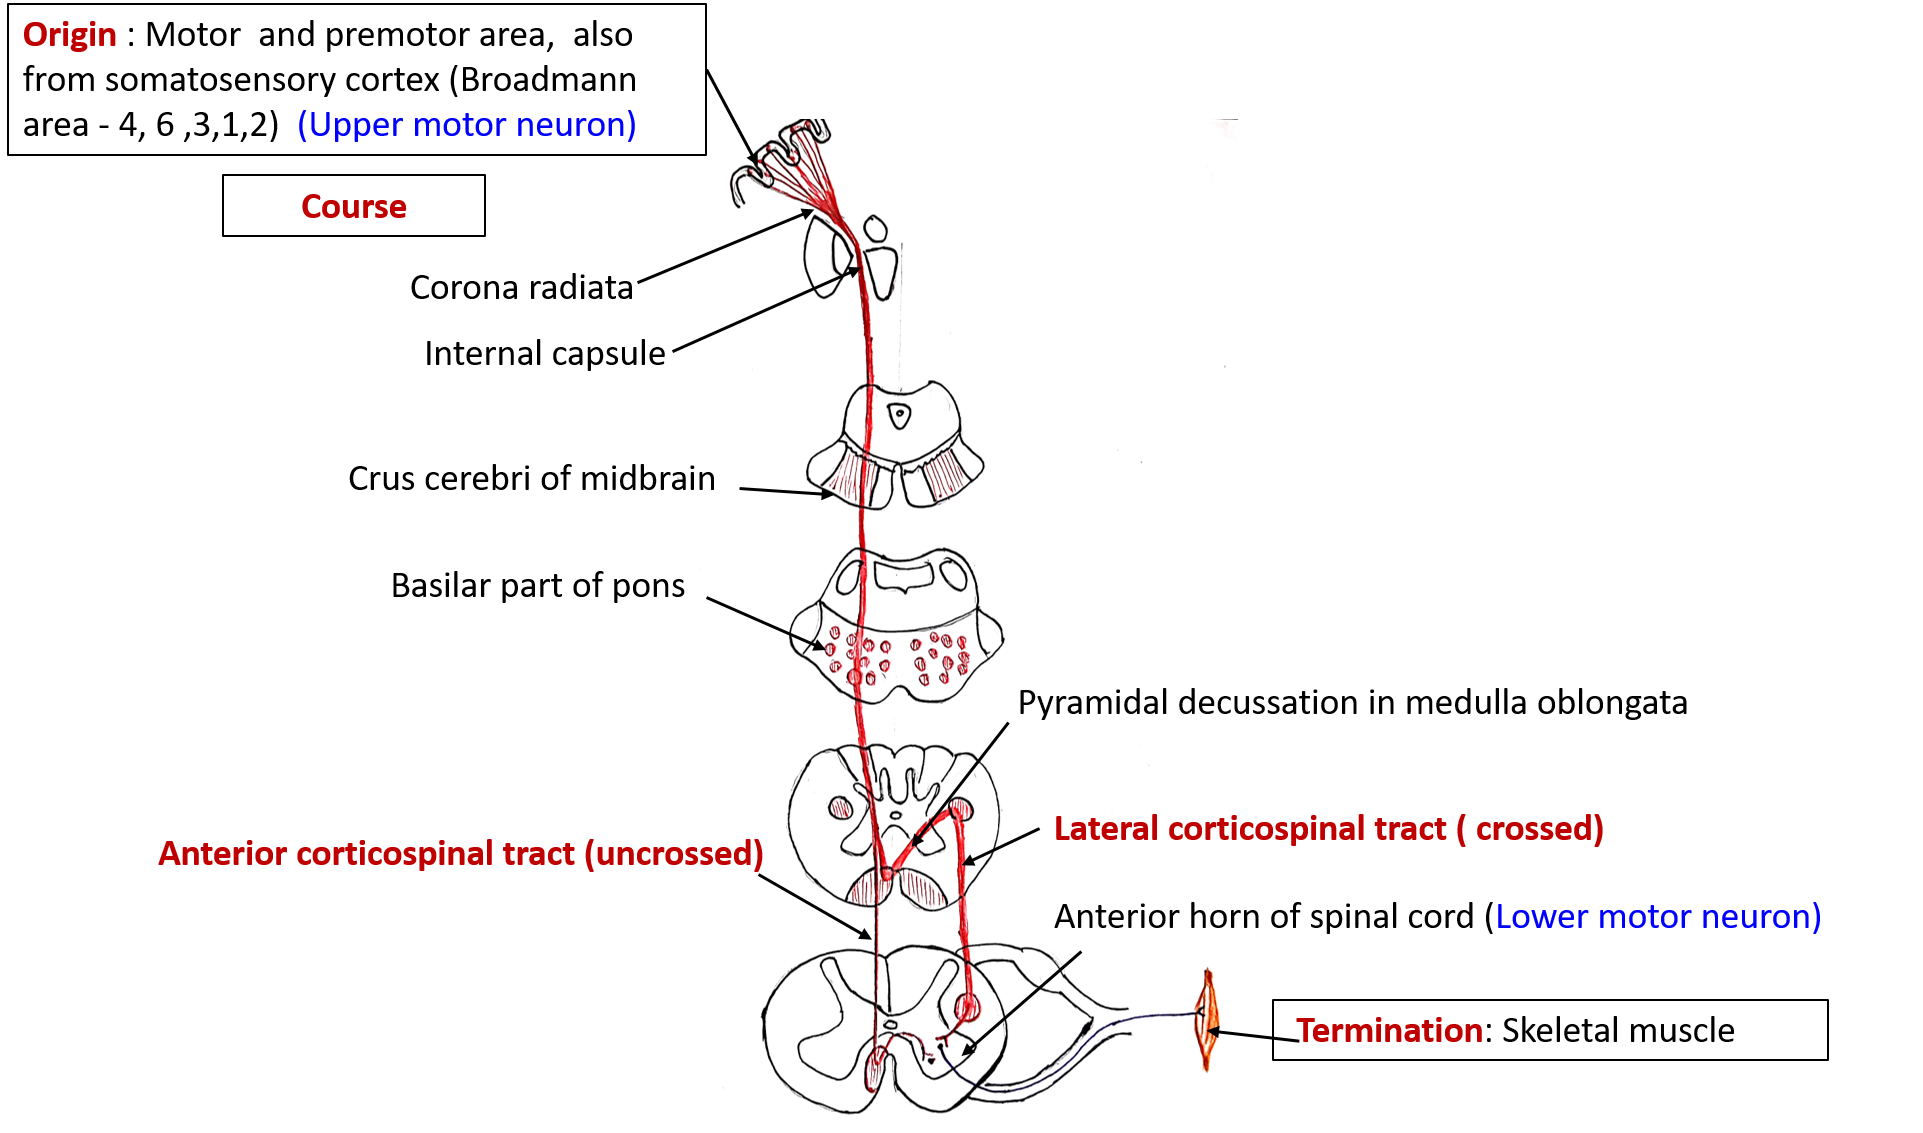 Descending tract - Corticospinal tracts